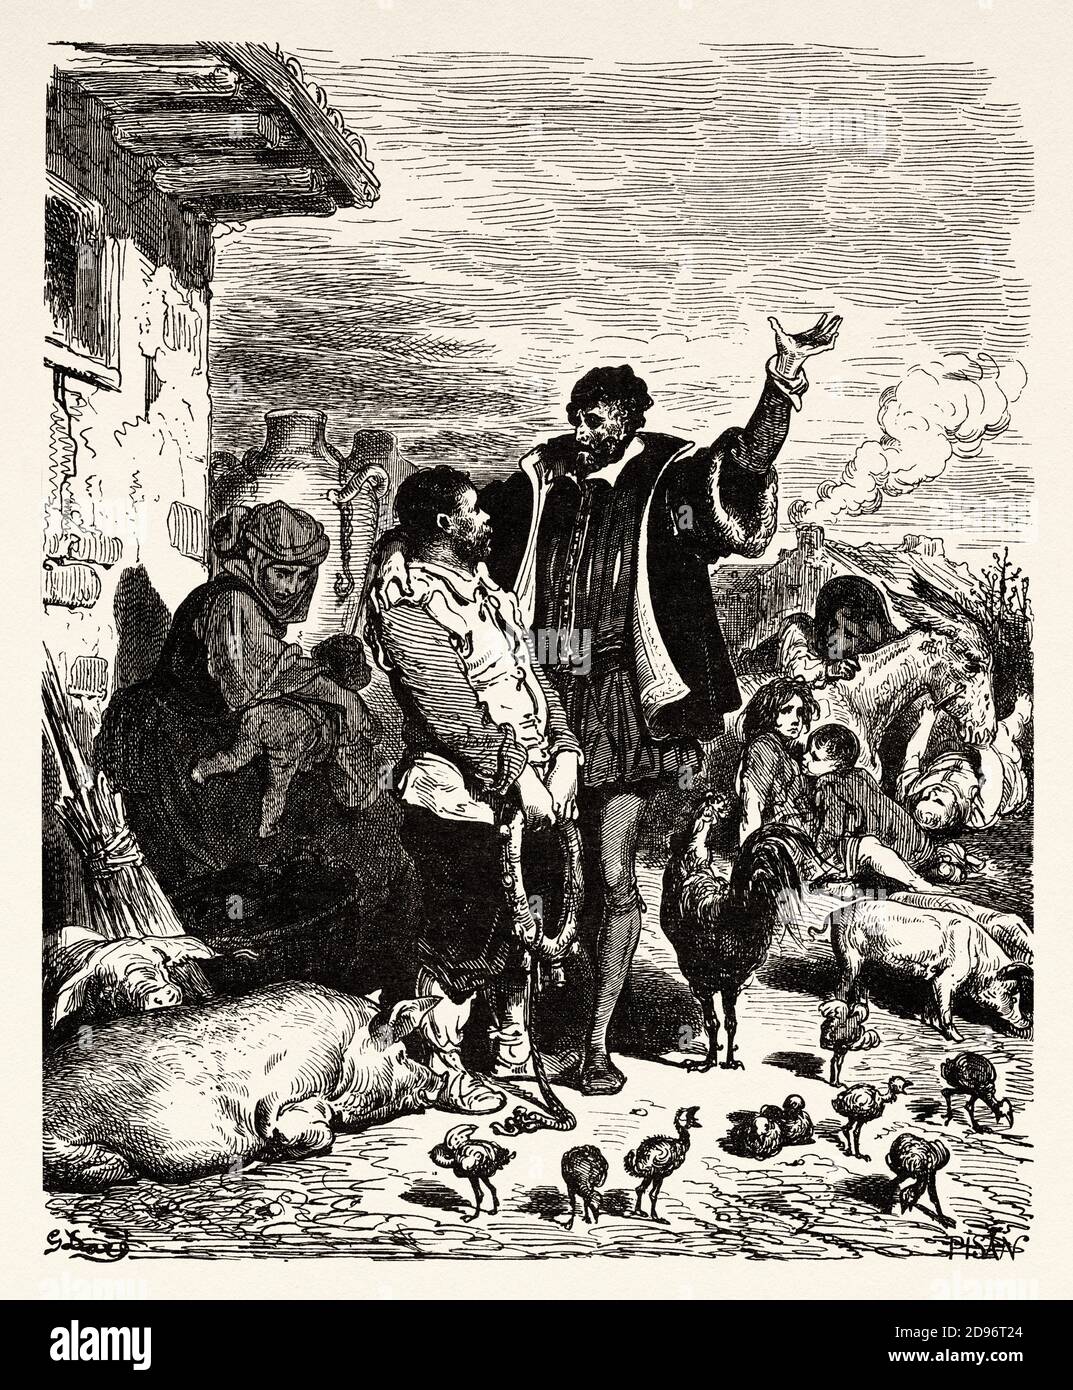 Don Quixote taking Sancho Panza from his home and pronouncing him governor. Don Quixote by Miguel de Cervantes Saavedra. Old XIX century engraving illustration by Gustave Dore Stock Photo